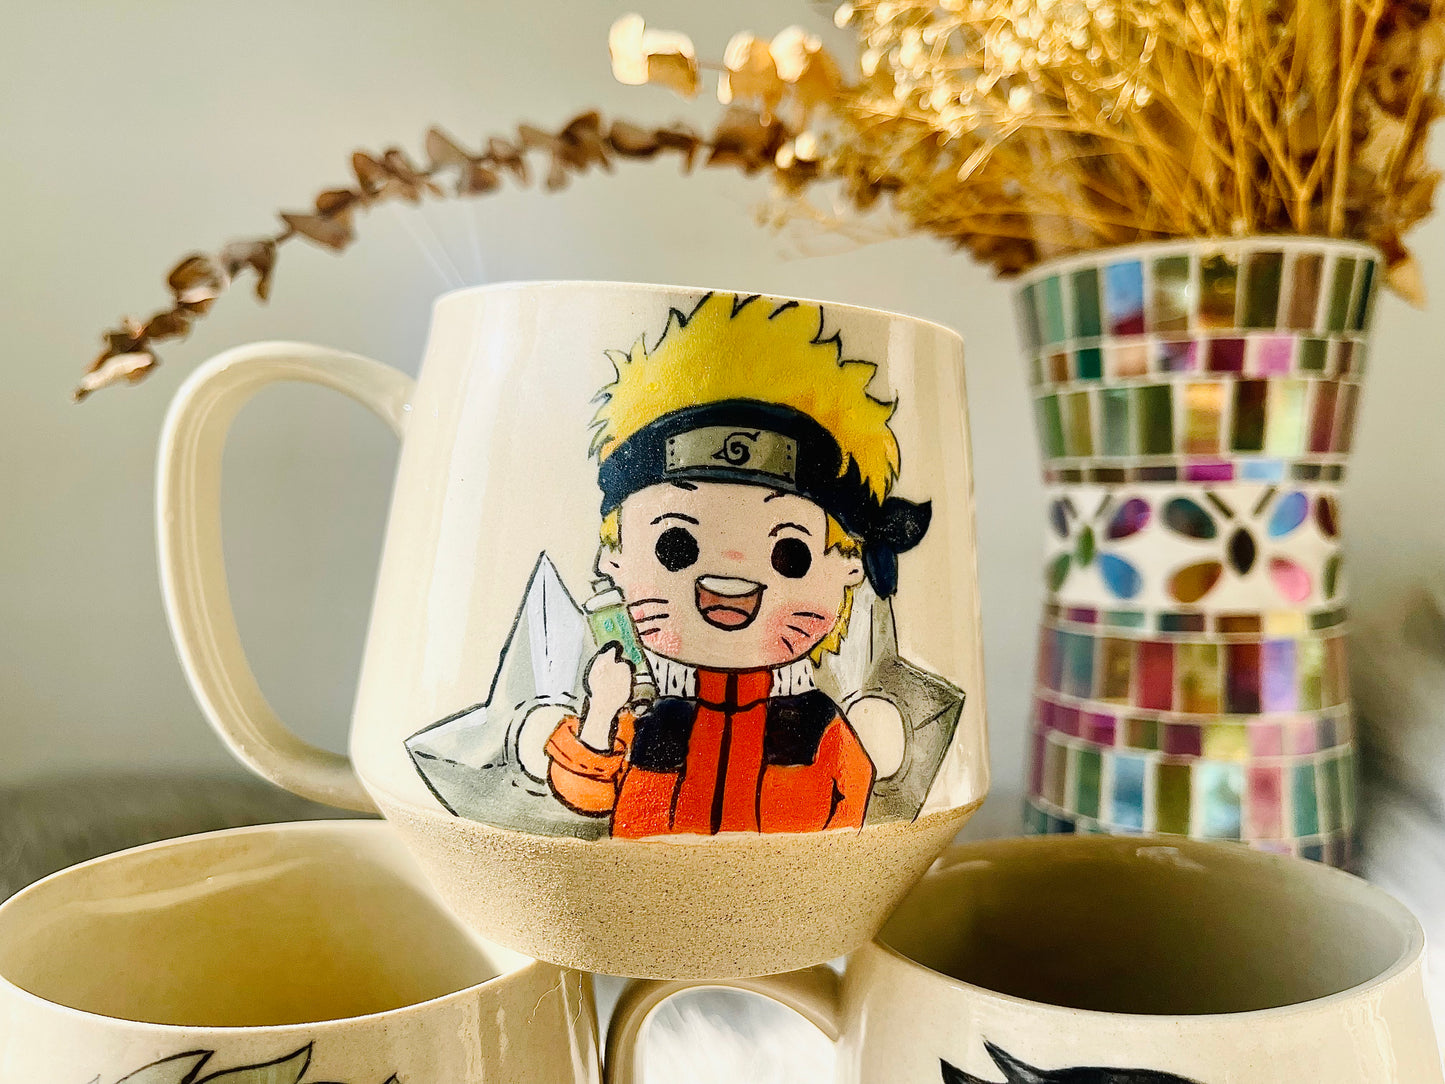 Naruto Handpainted Ceramic Coffee Mugs, Personalized Anime-Inspired Cup for Gifts